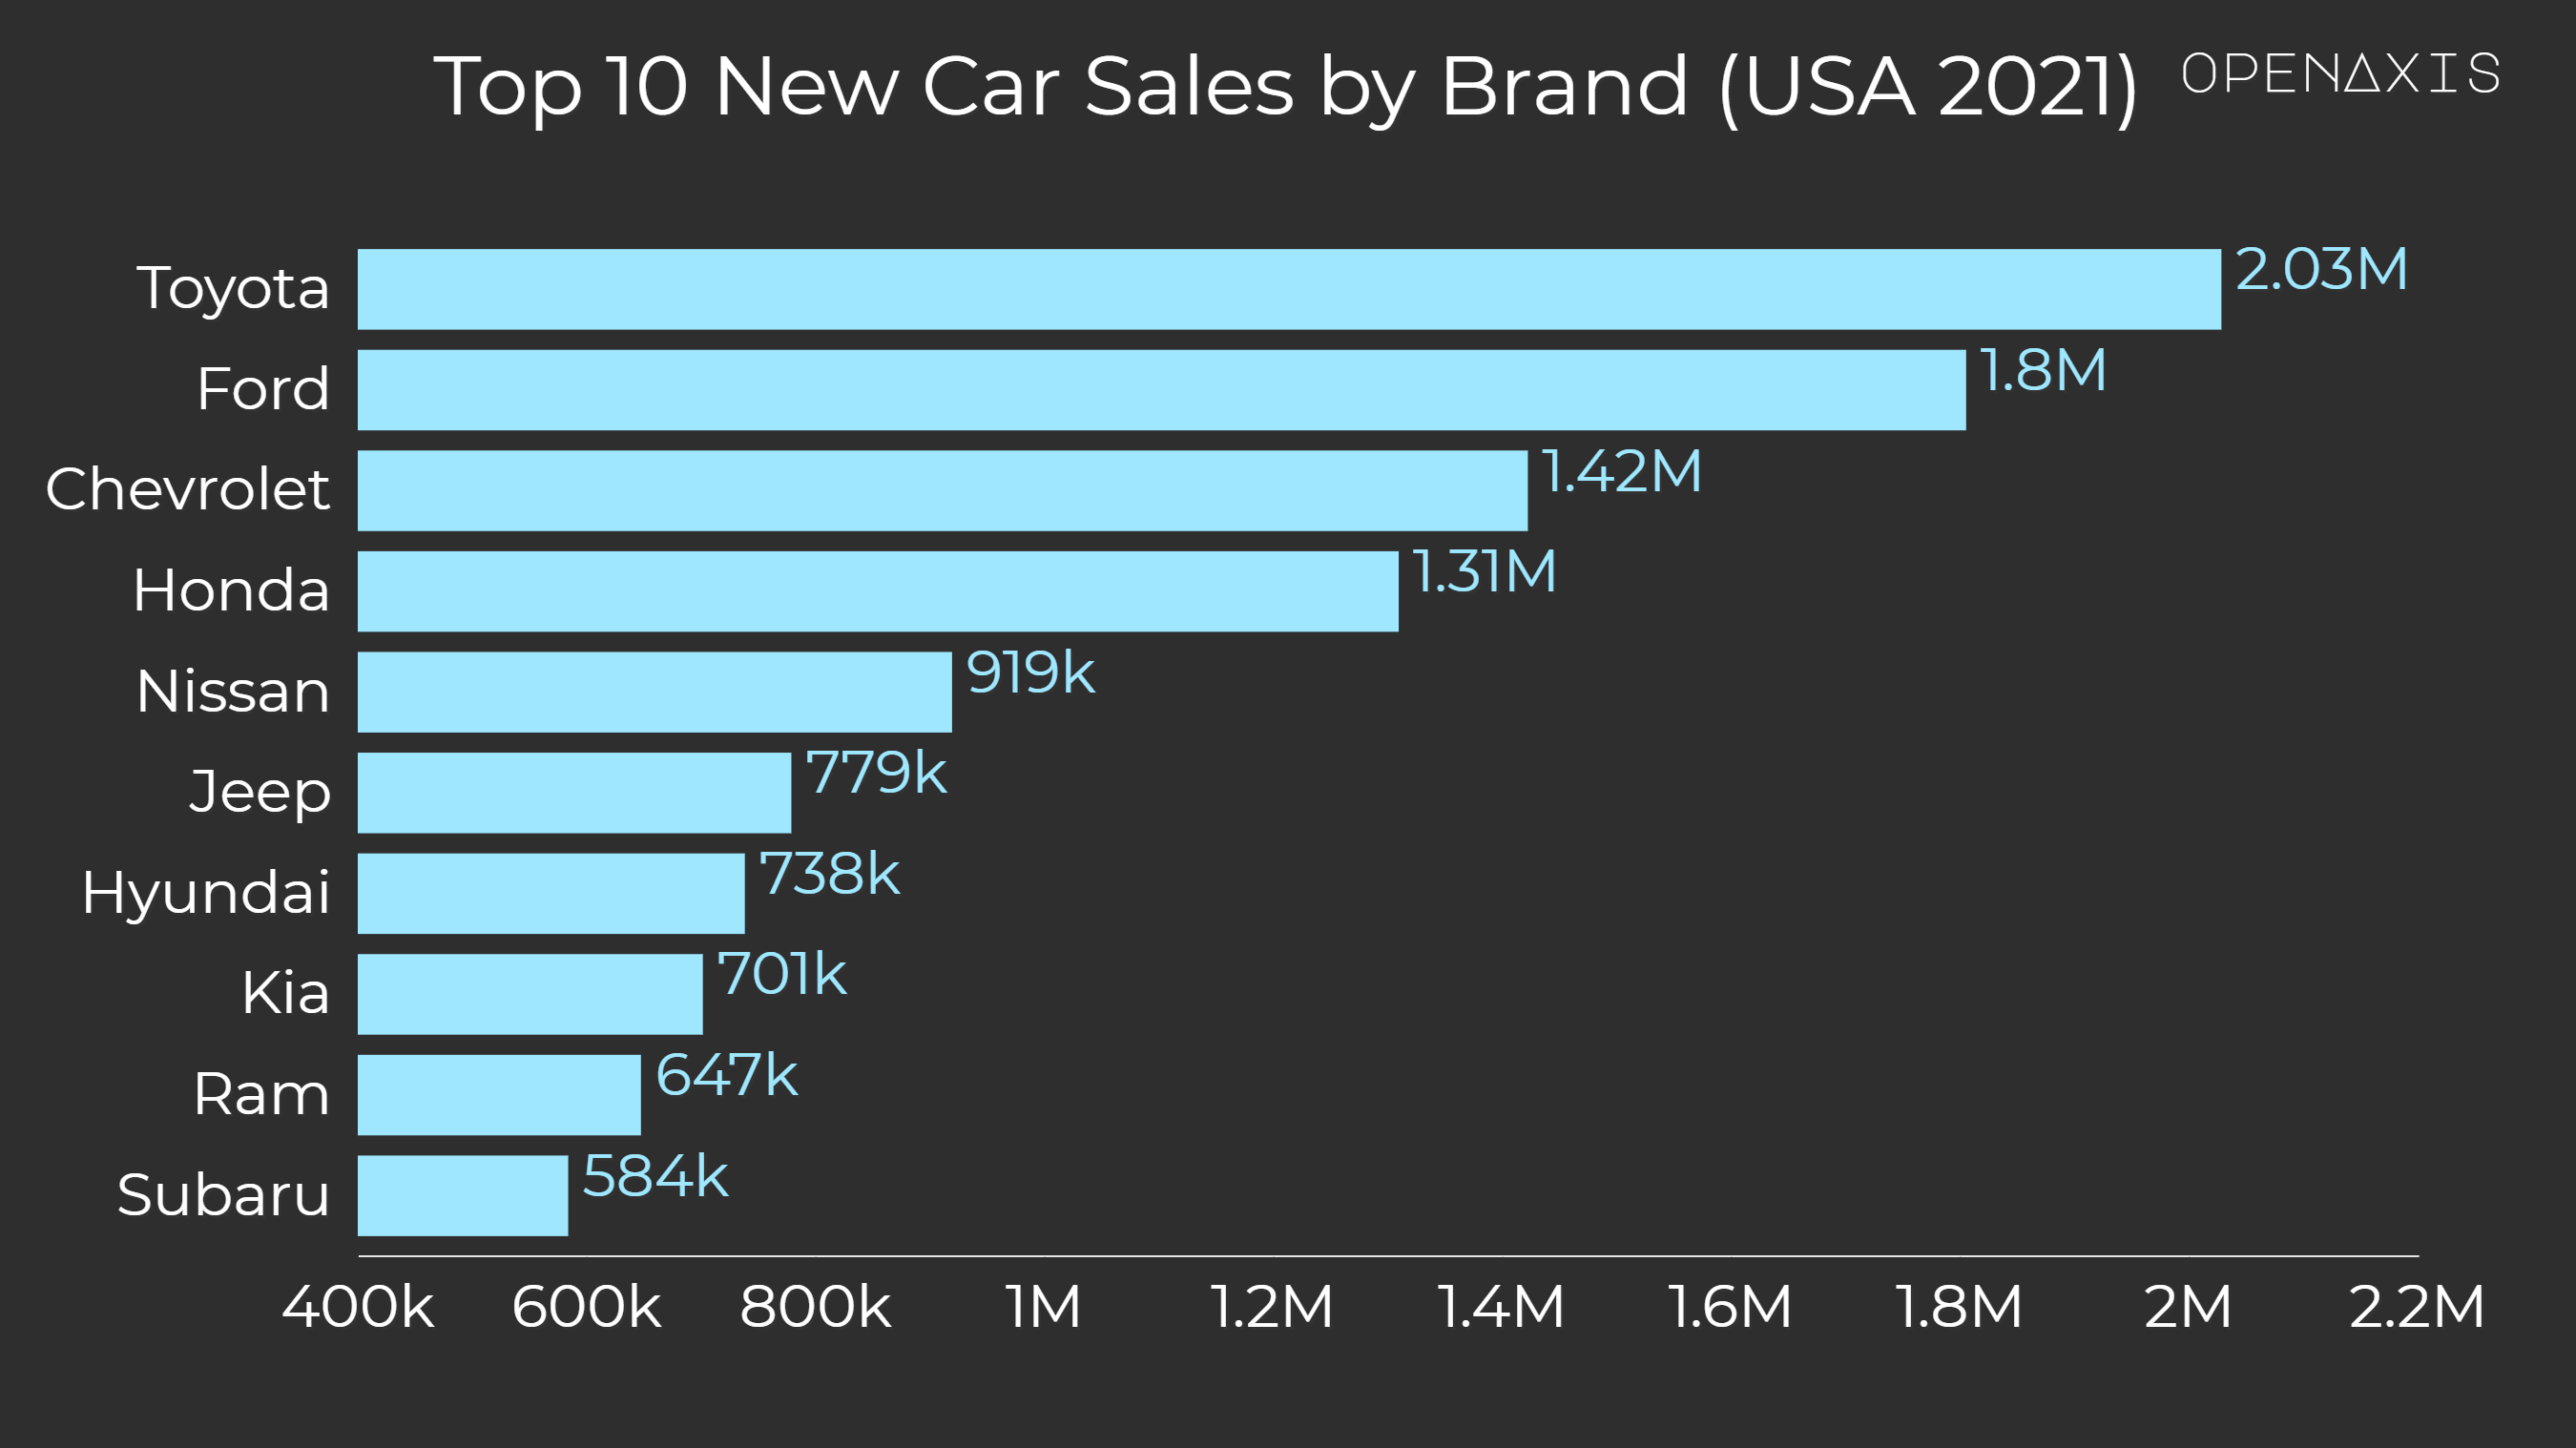 "Top 10 New Car Sales by Brand (USA 2021)"